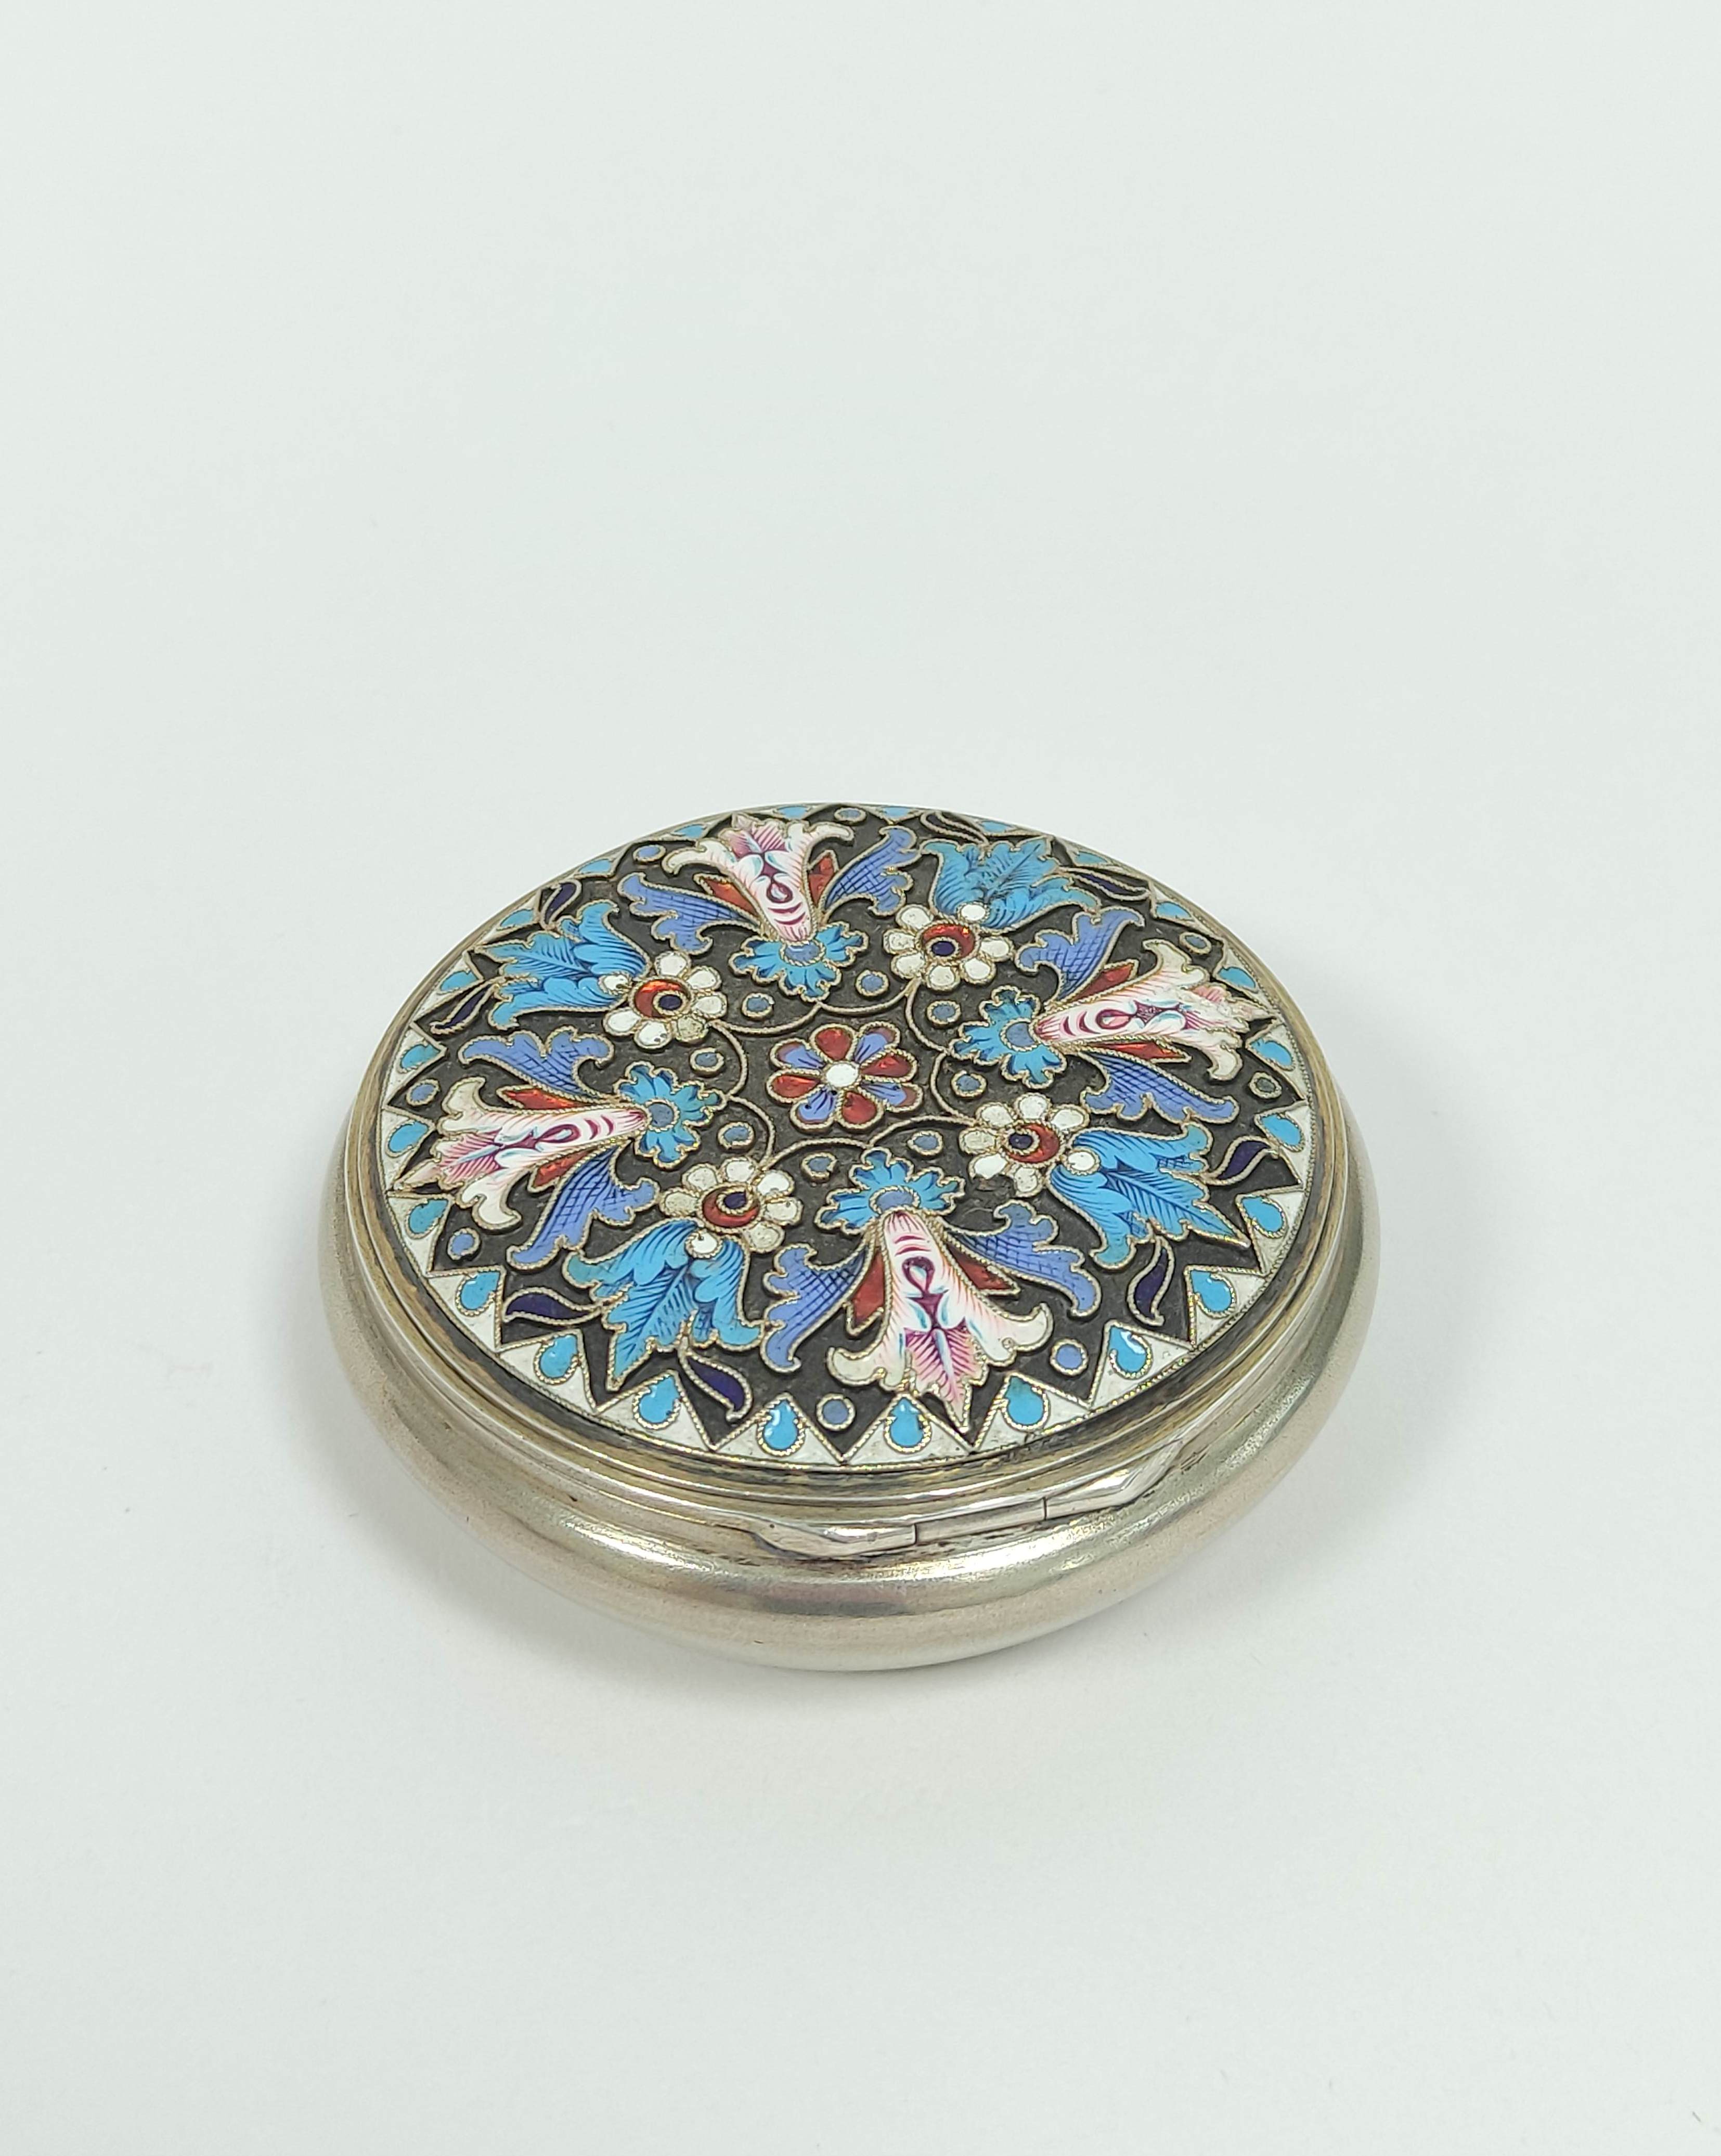 Faberge silver gilt and enamel circular box with angular sides and cover in blue, white pink and - Image 5 of 6